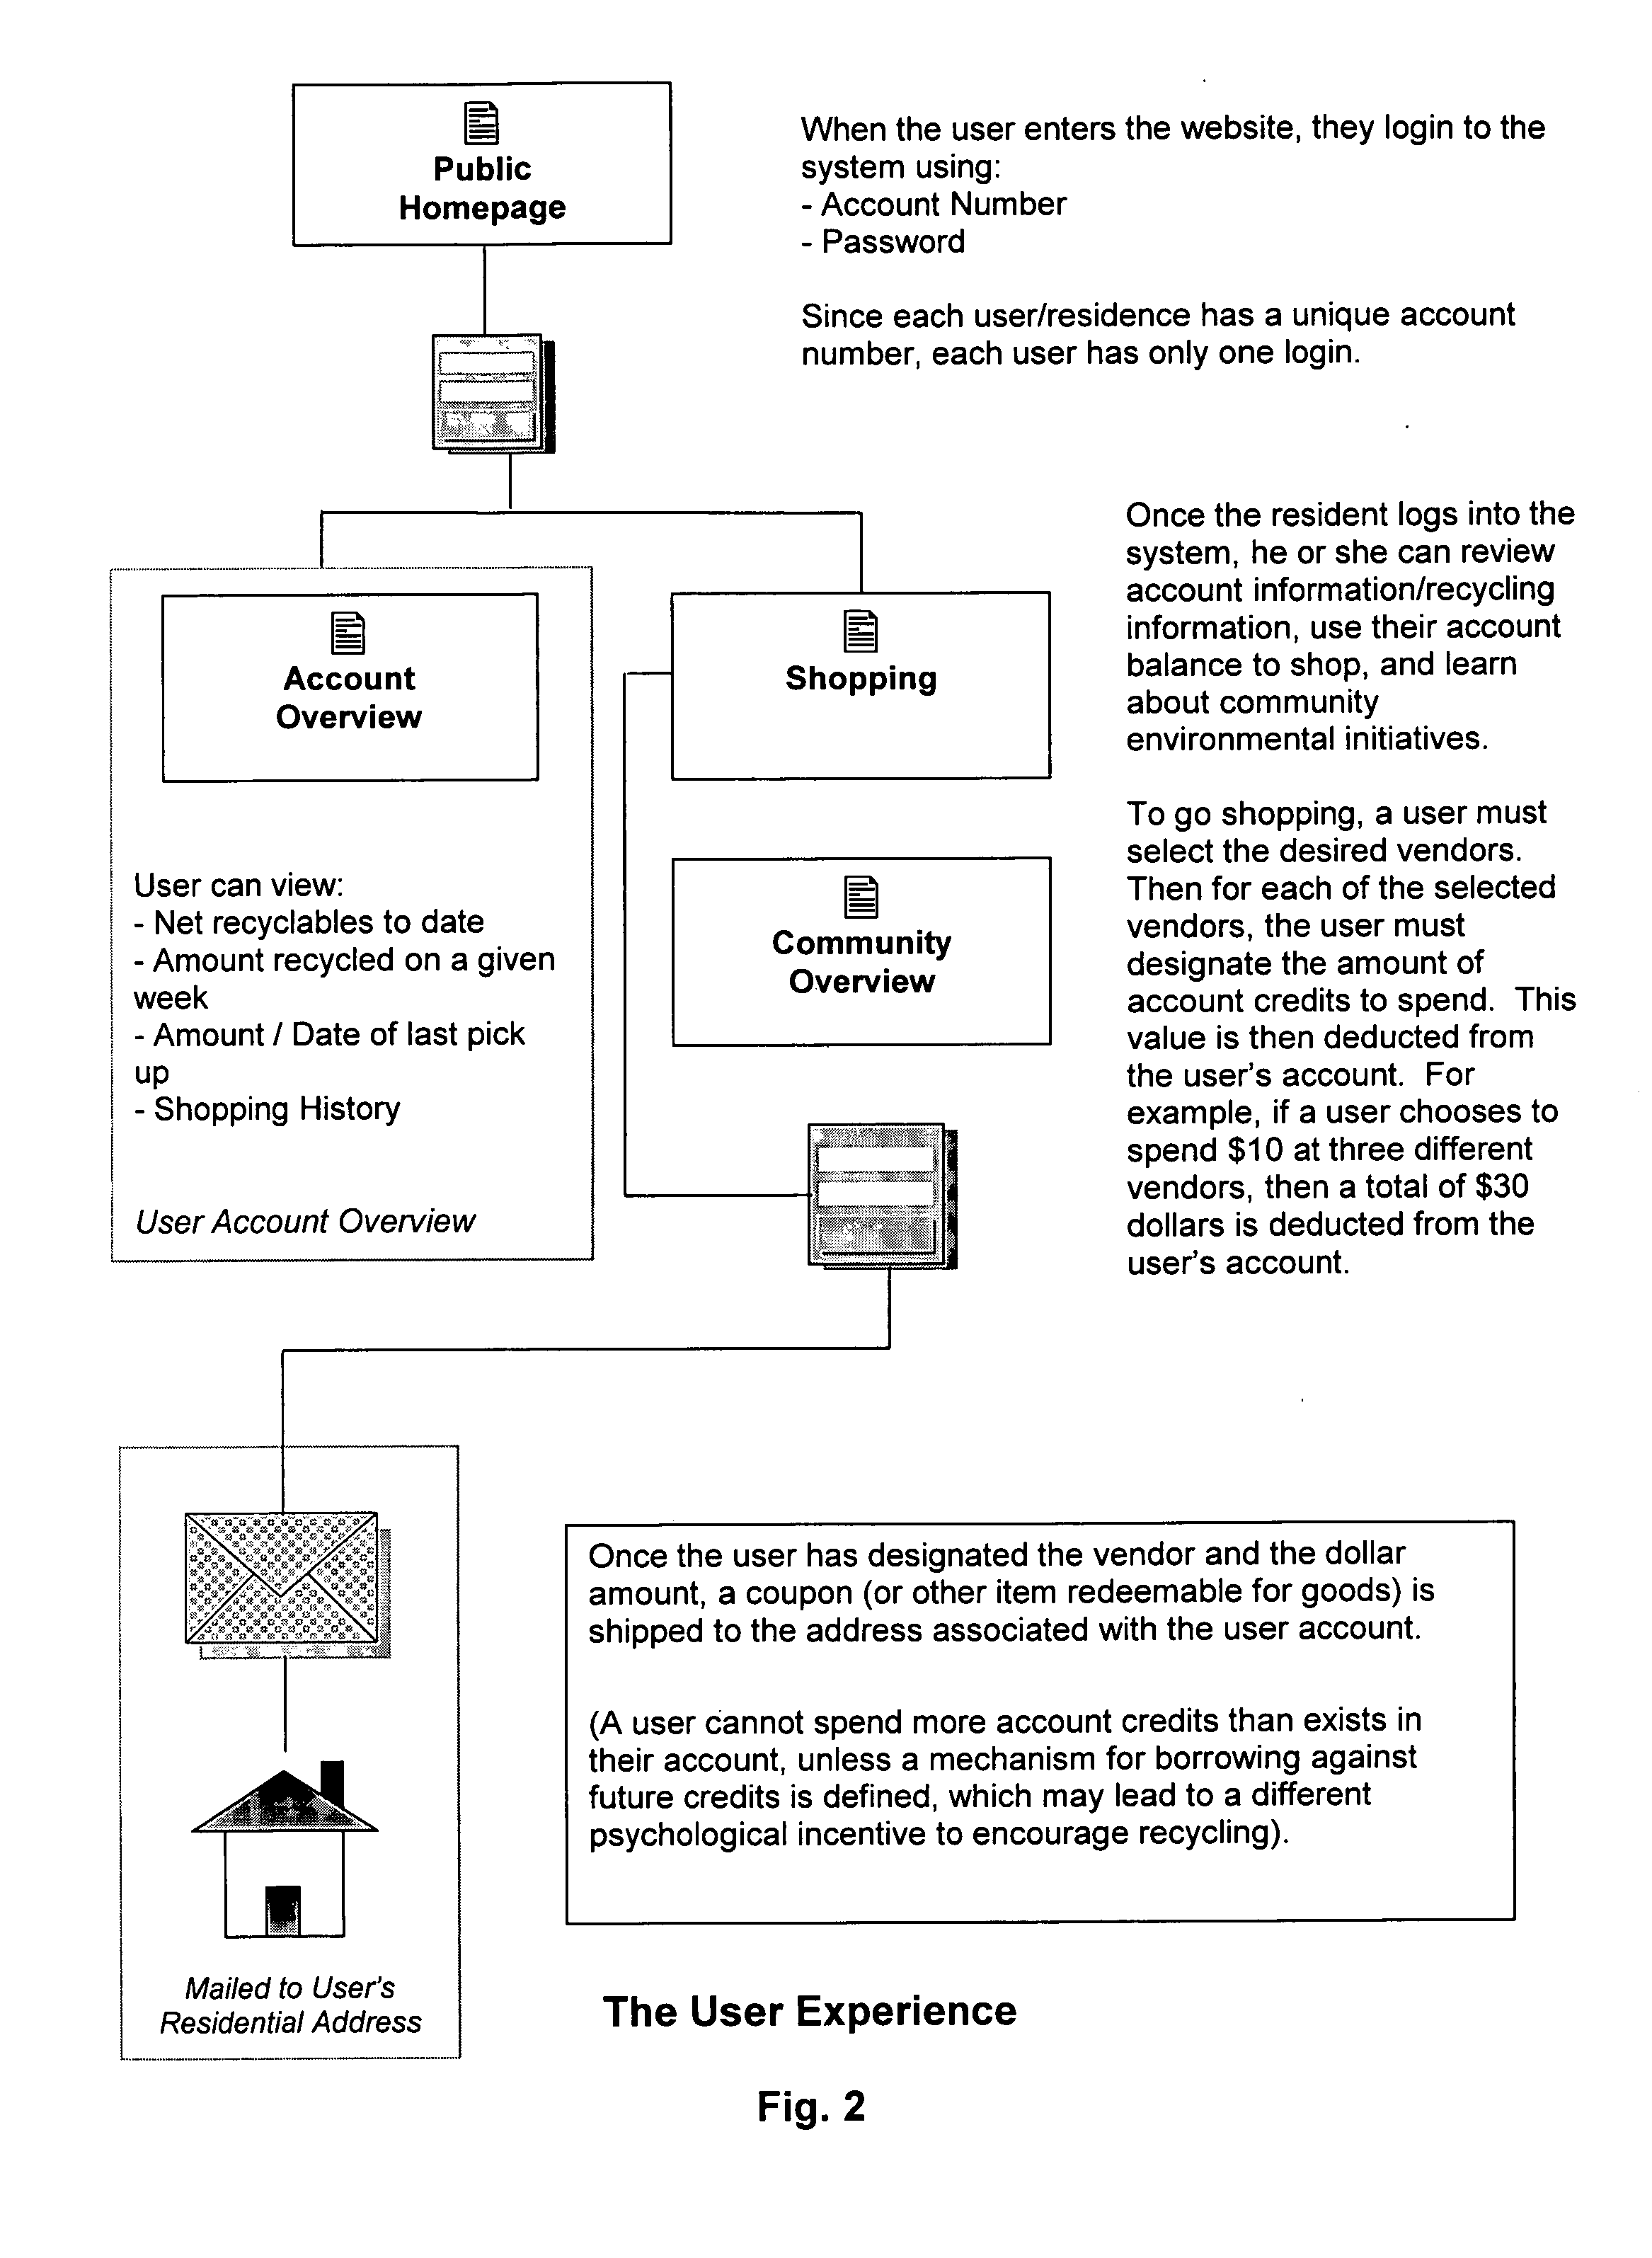 Method and system for improving recycling through the use of financial incentives